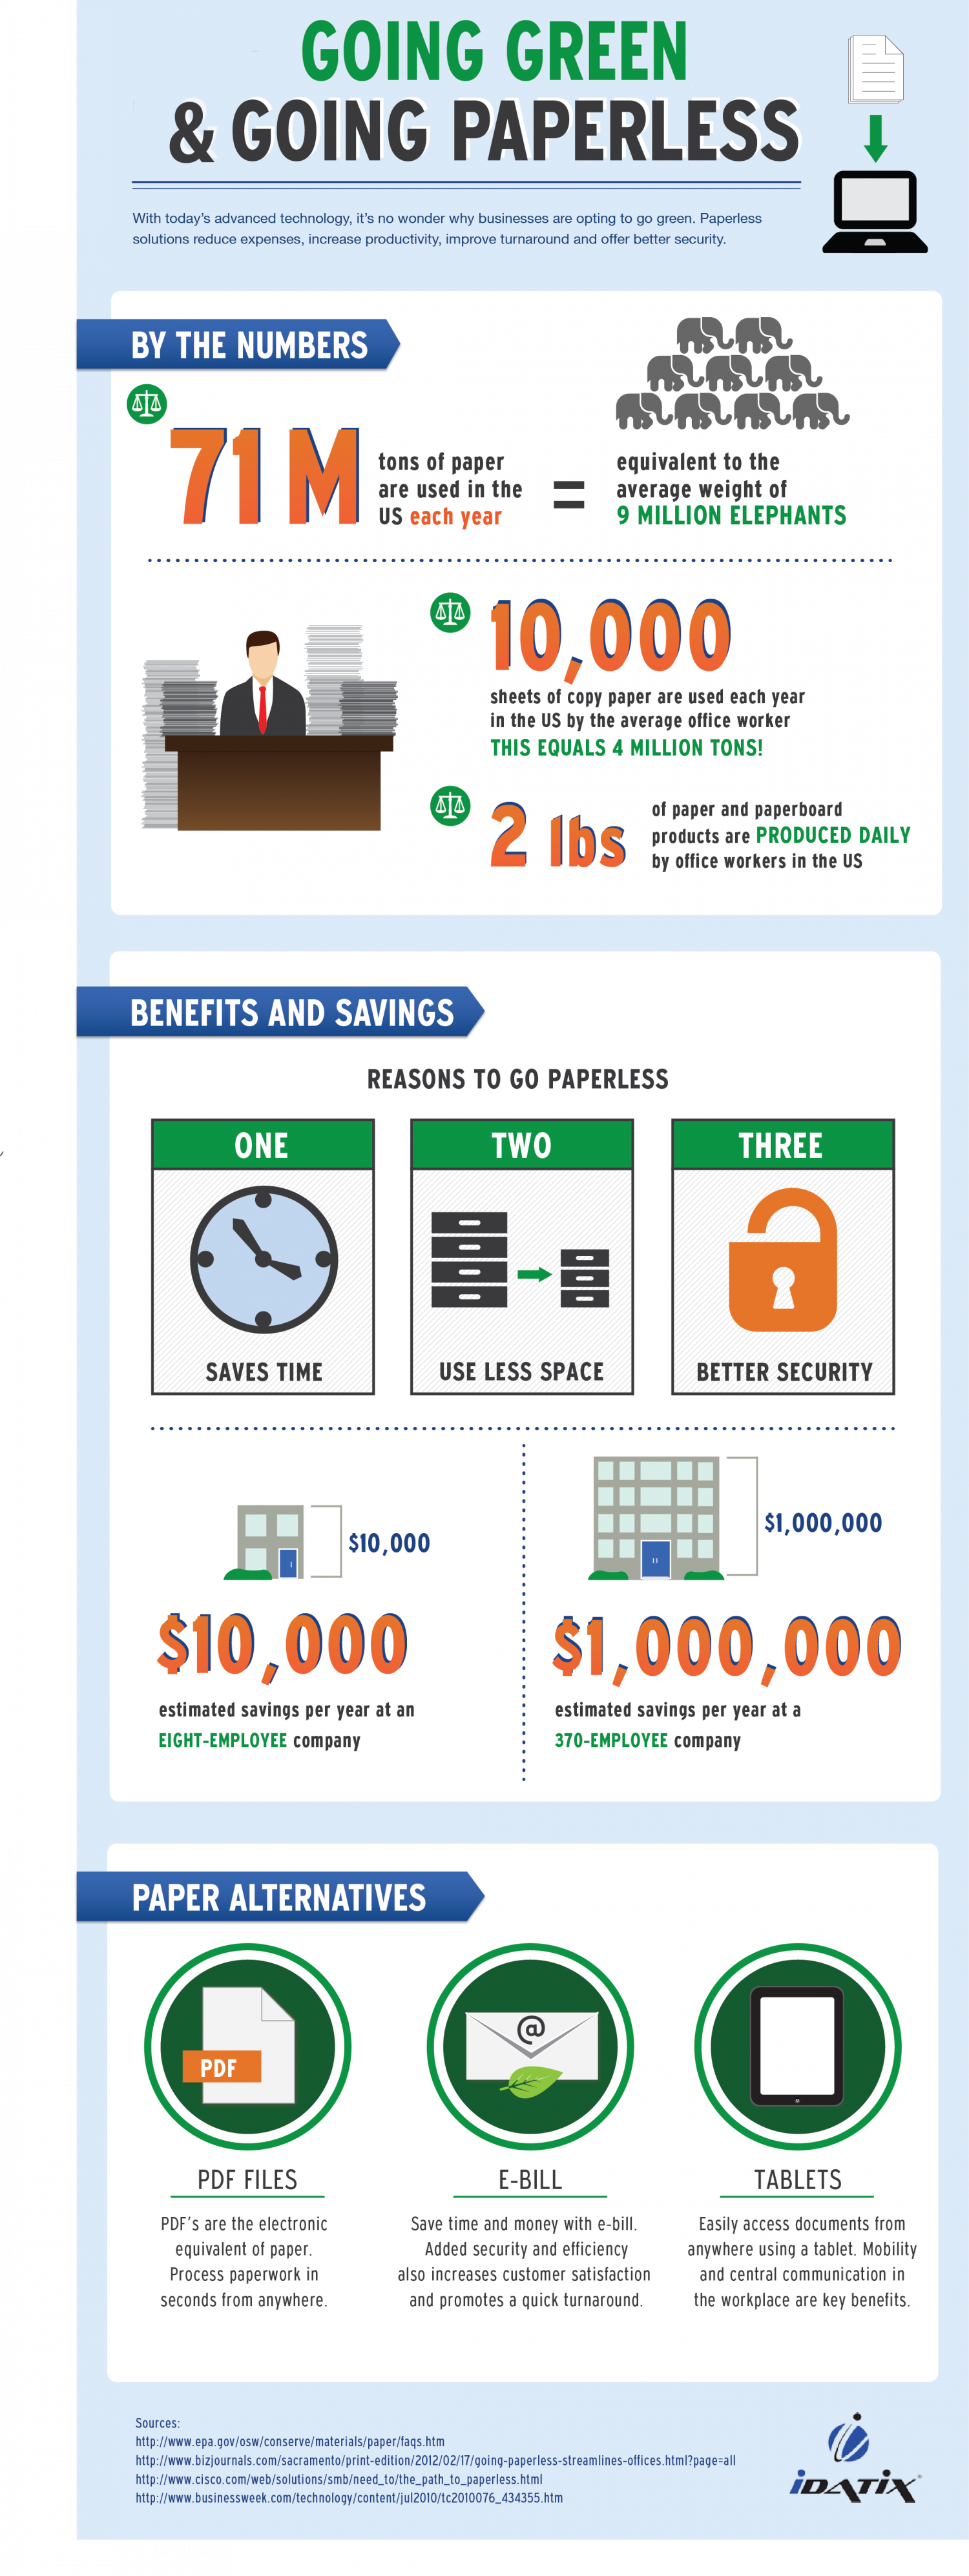 Going Green & Going Paperless Infographic